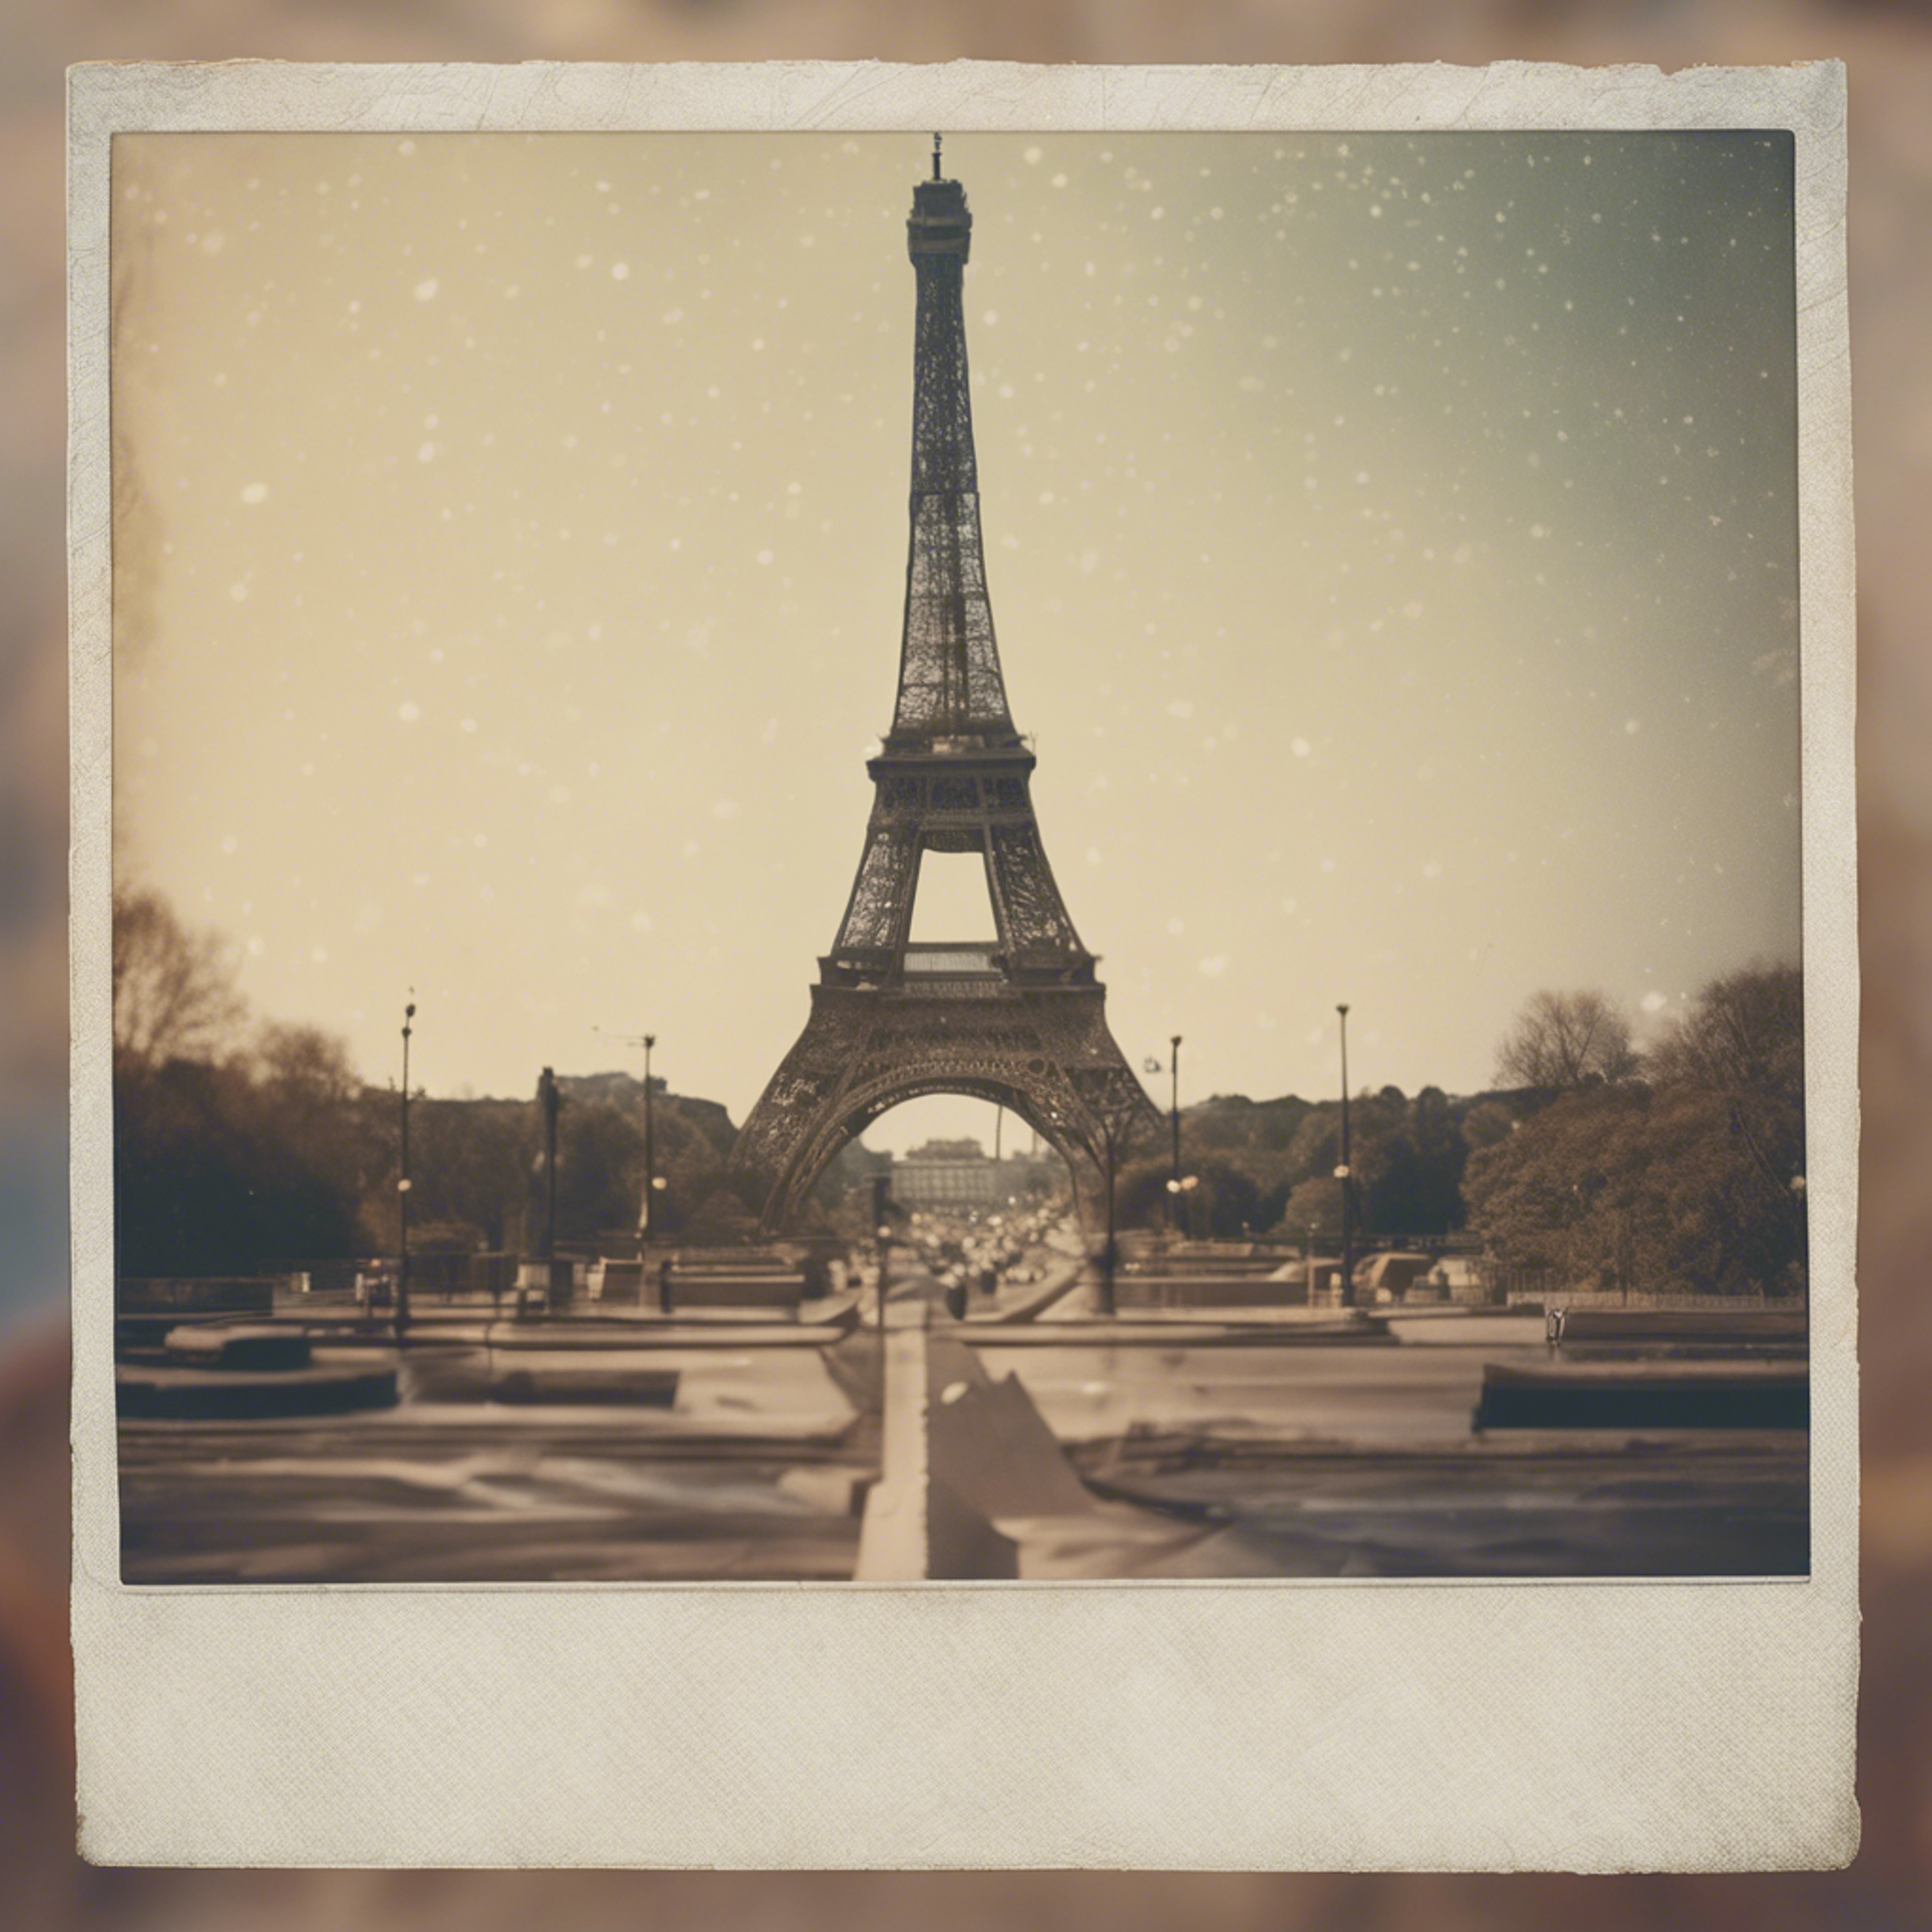 A faded beige Polaroid picture of an iconic landmark from the 70s. Wallpaper[3ceb93f71d2c49b28cf4]